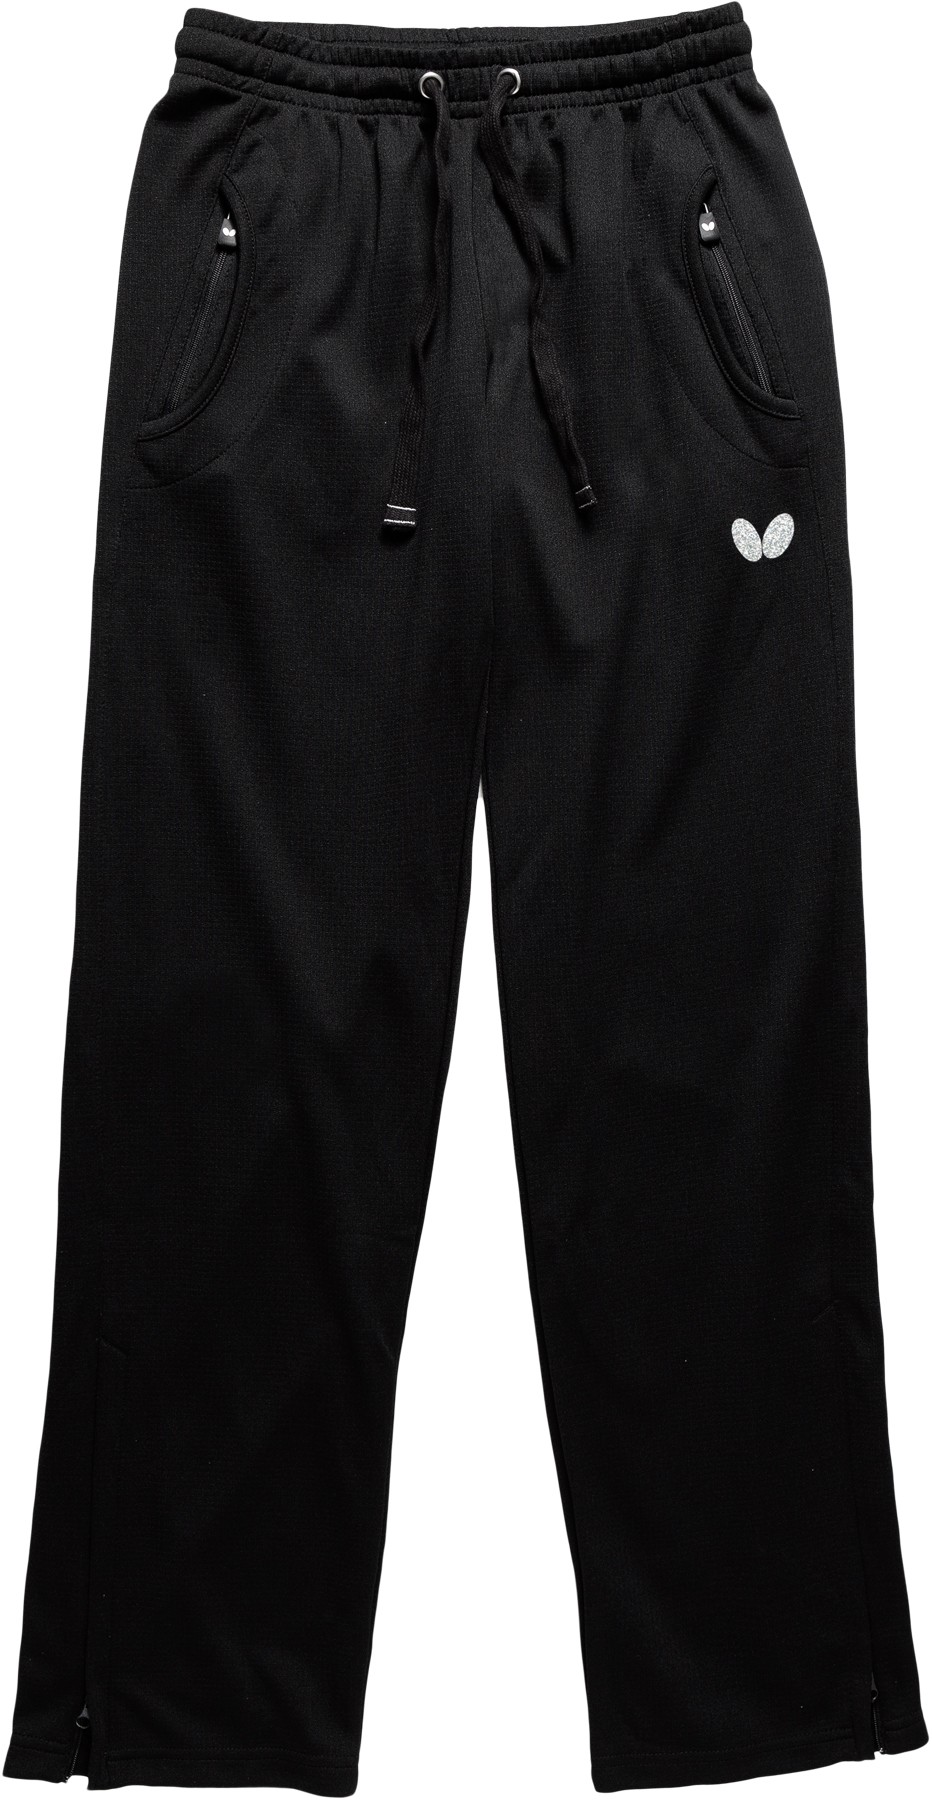 mobile Leia Warmth Butterfly Pants Kido Lady | Tabletennis11.com (TT11)